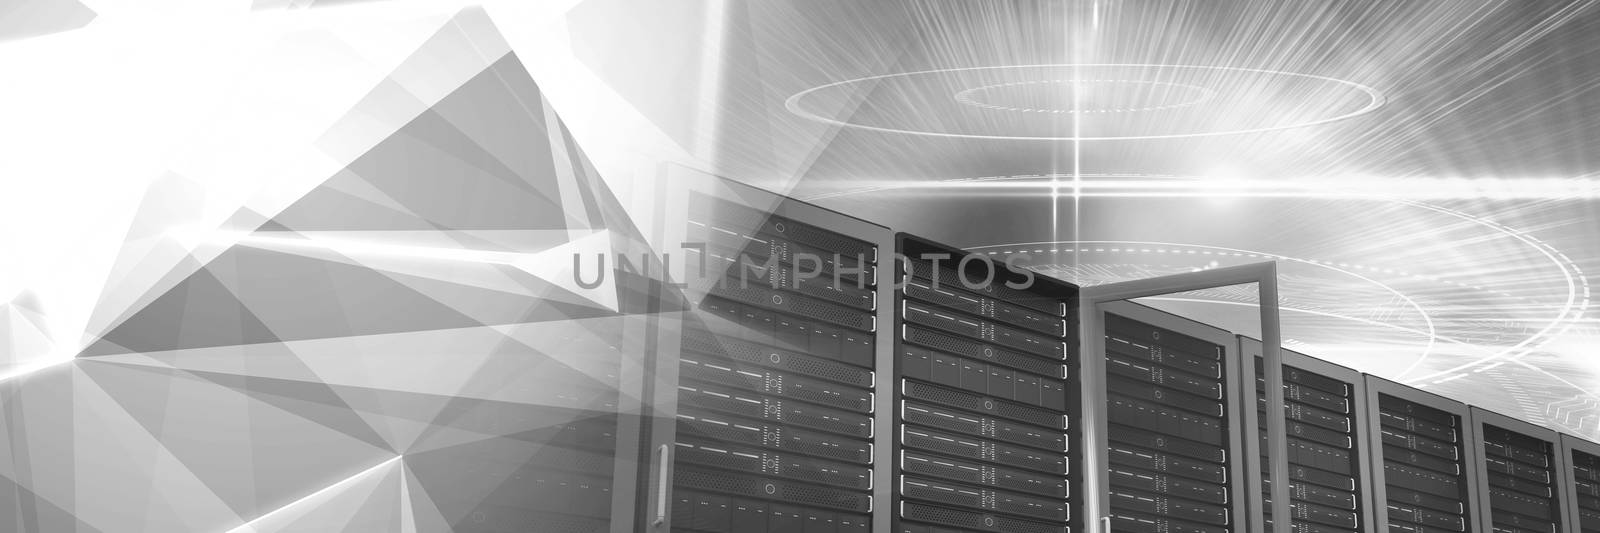 Digital composite of Computer servers and technology information interface transition